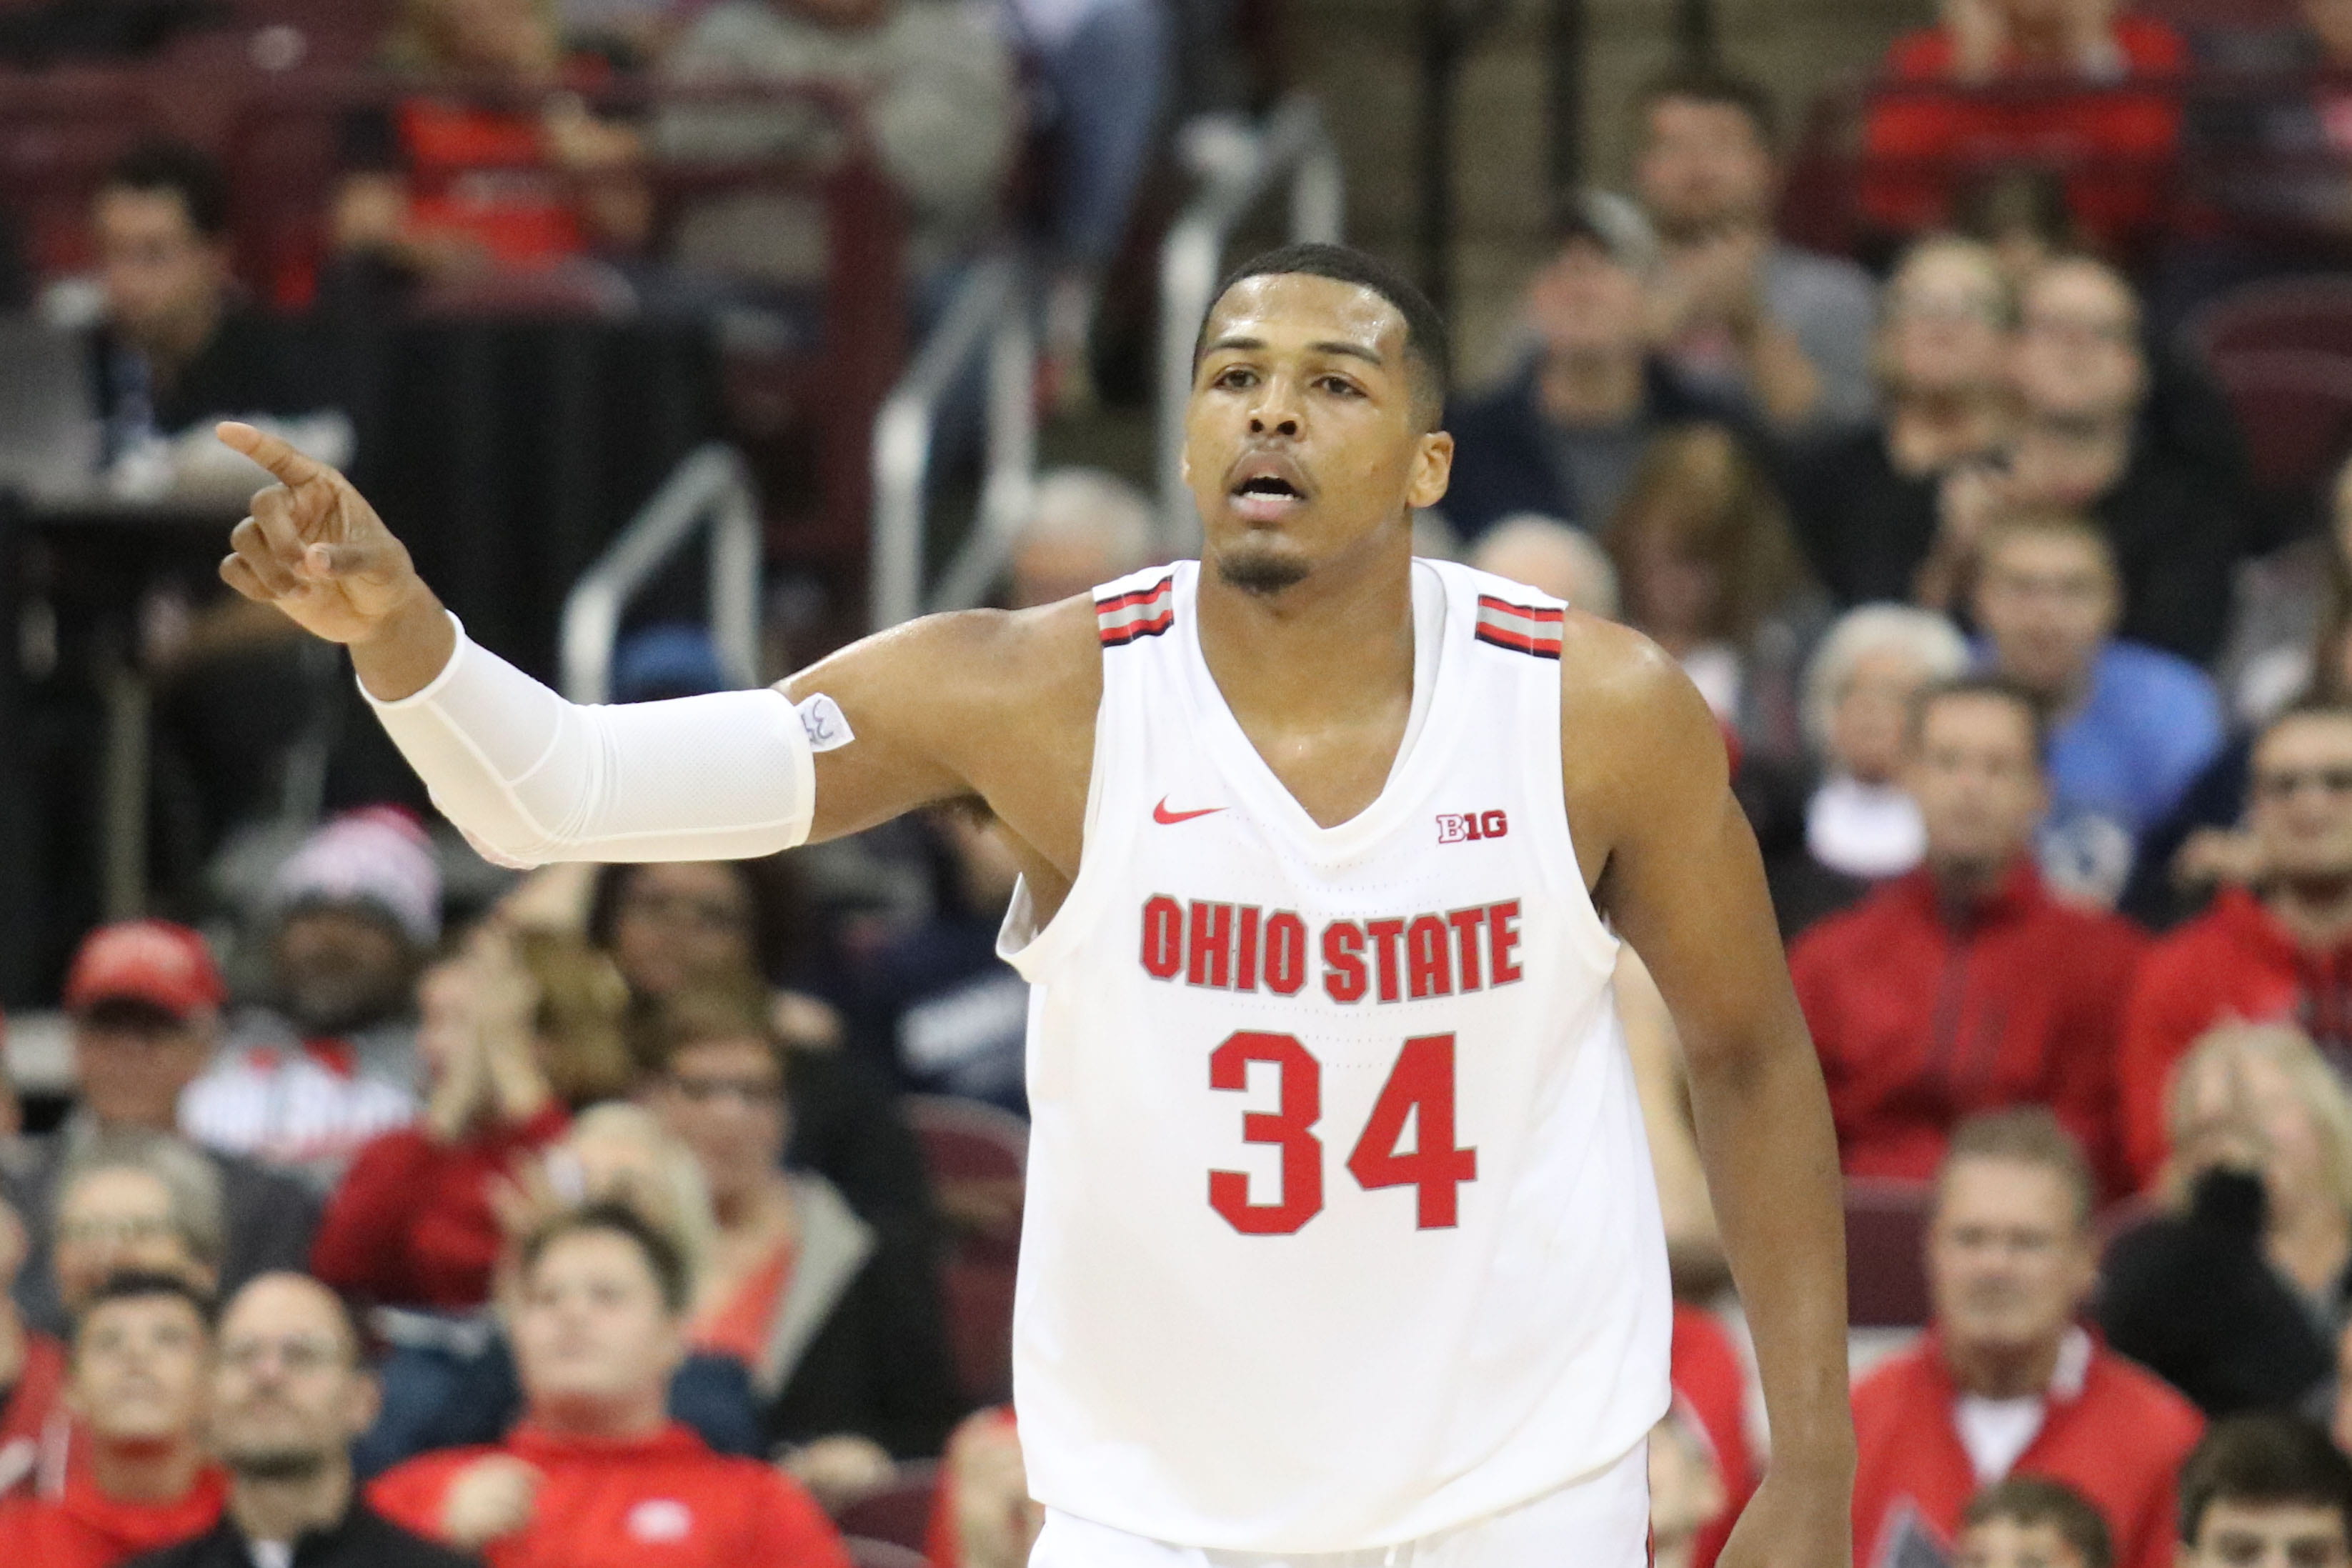 Men’s Basketball No. 18 Ohio State crushes Cedarville 9552 in opening